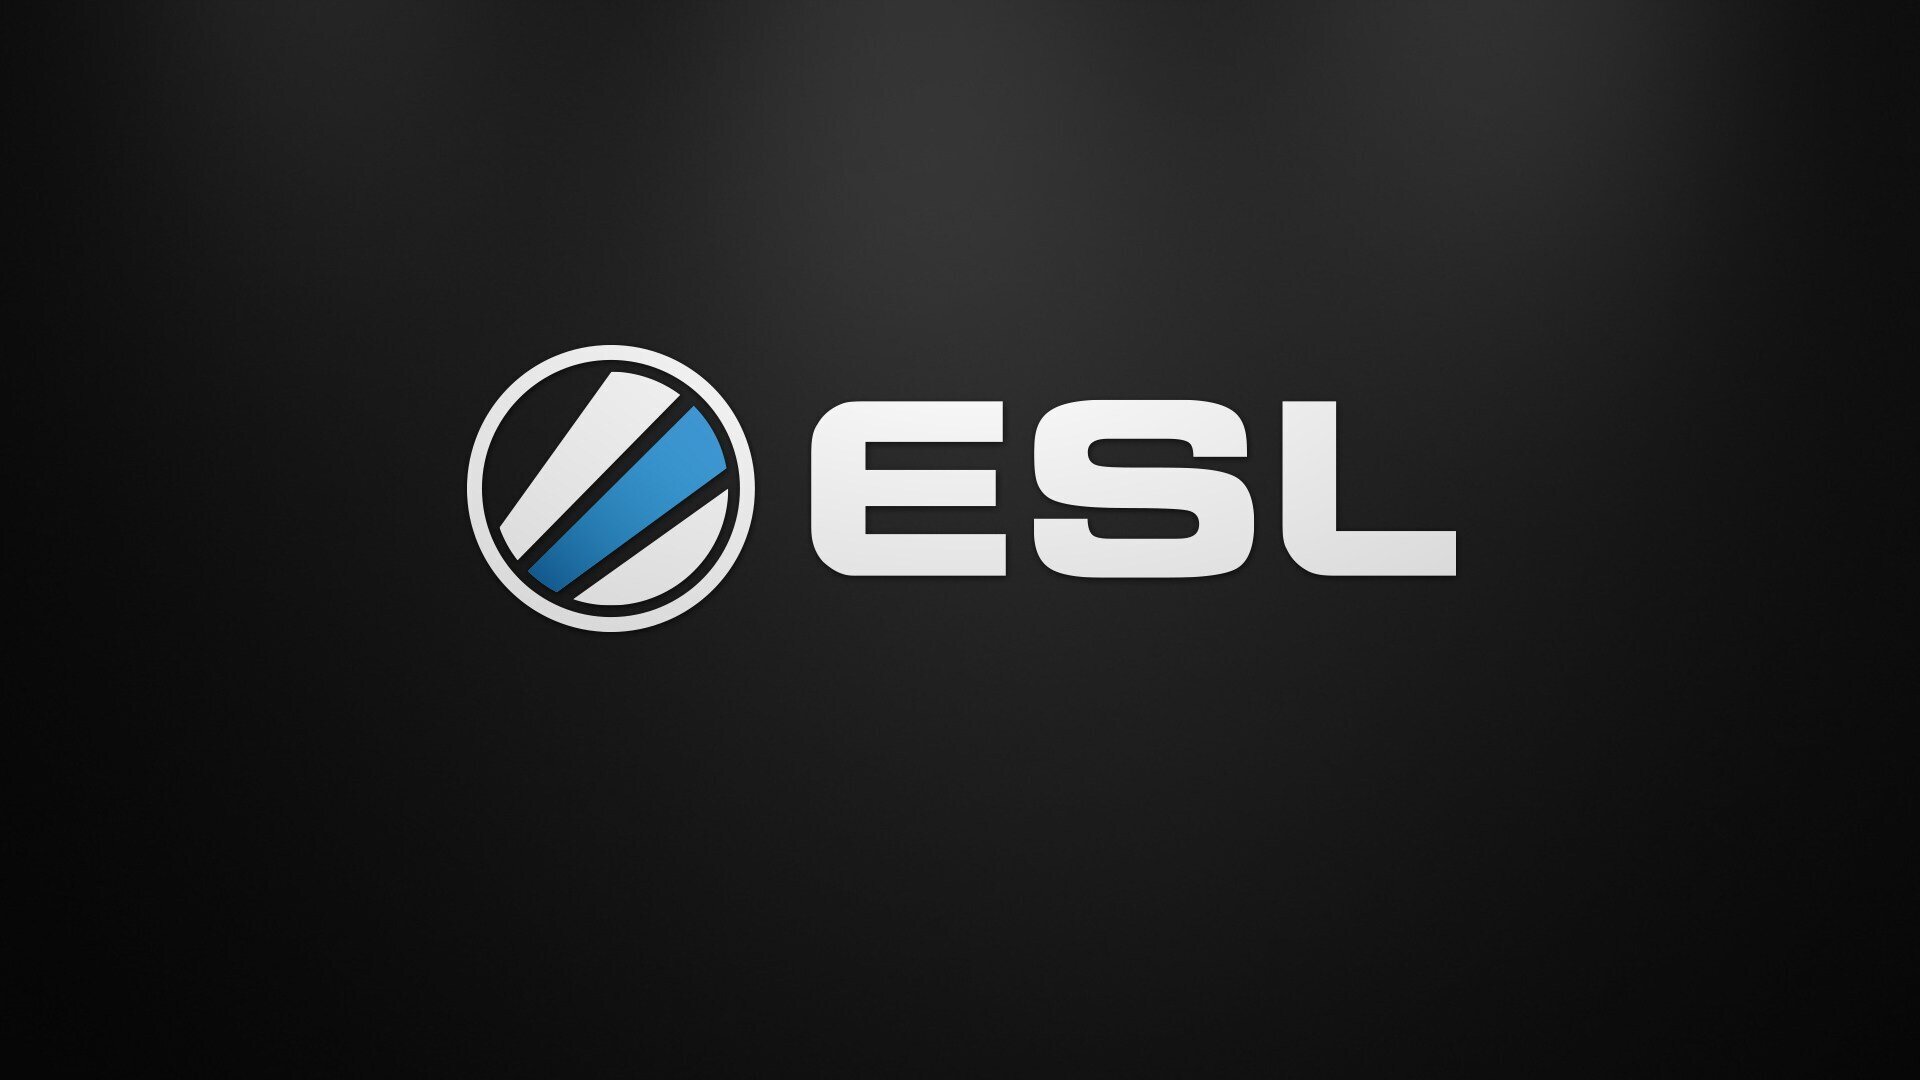 Today ESL announced they will expand their international Dota 2 tournament series to include a new location: Mumbai, India.